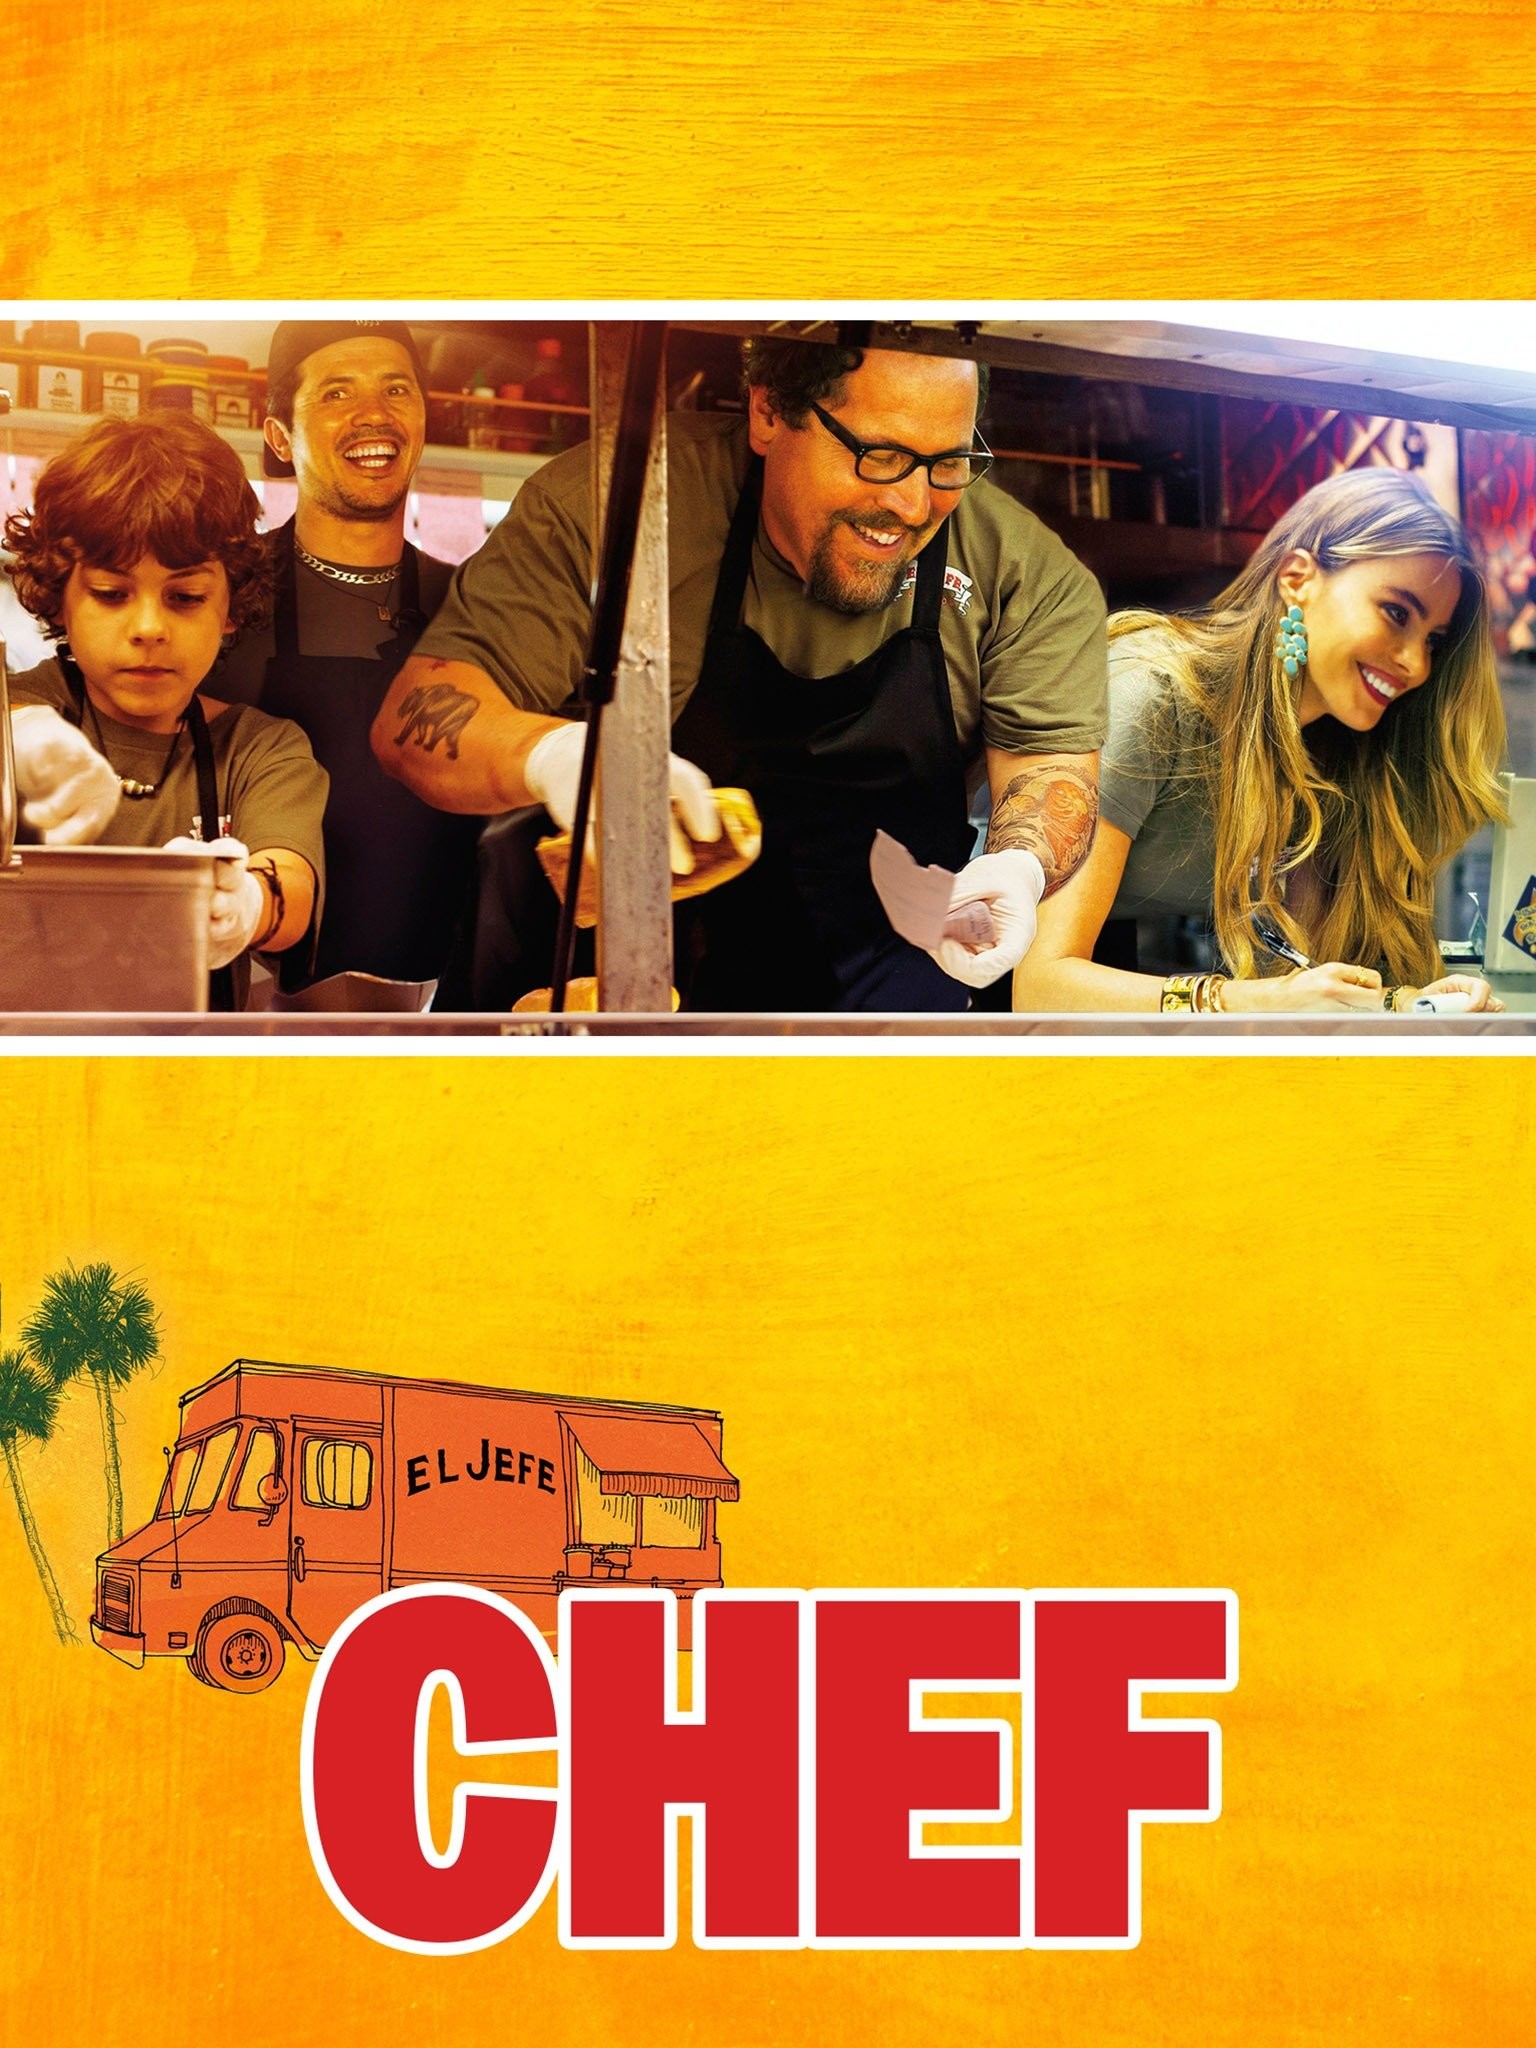 The 99 Cent Chef: January 2019